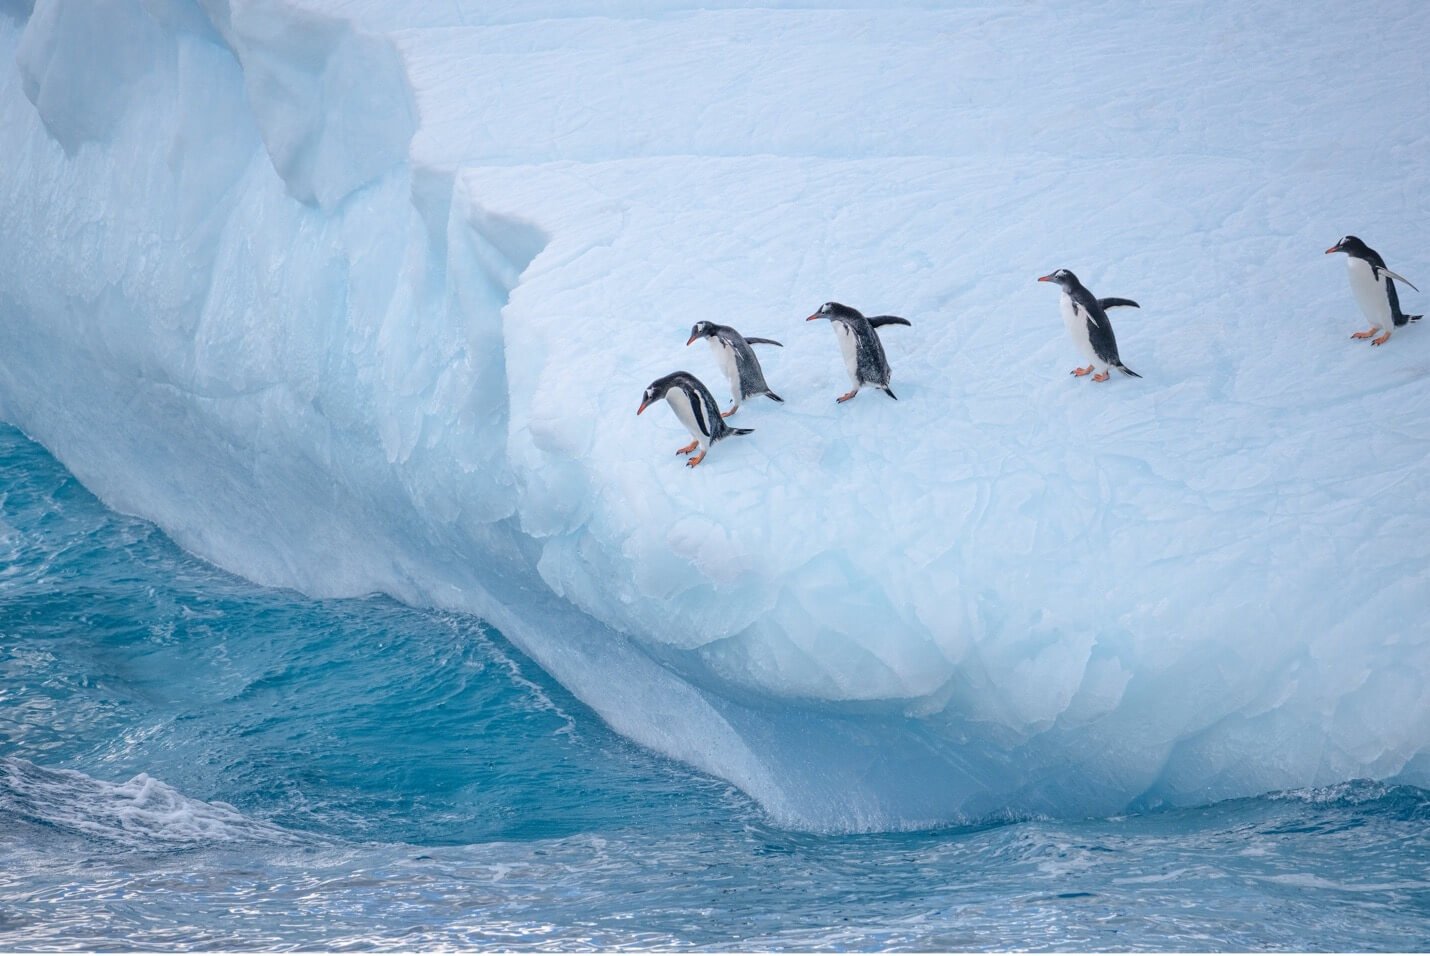 Penguins on iceberg Heading Out for Lunch © 2019 Debbie McCulliss. All Rights Reserved.